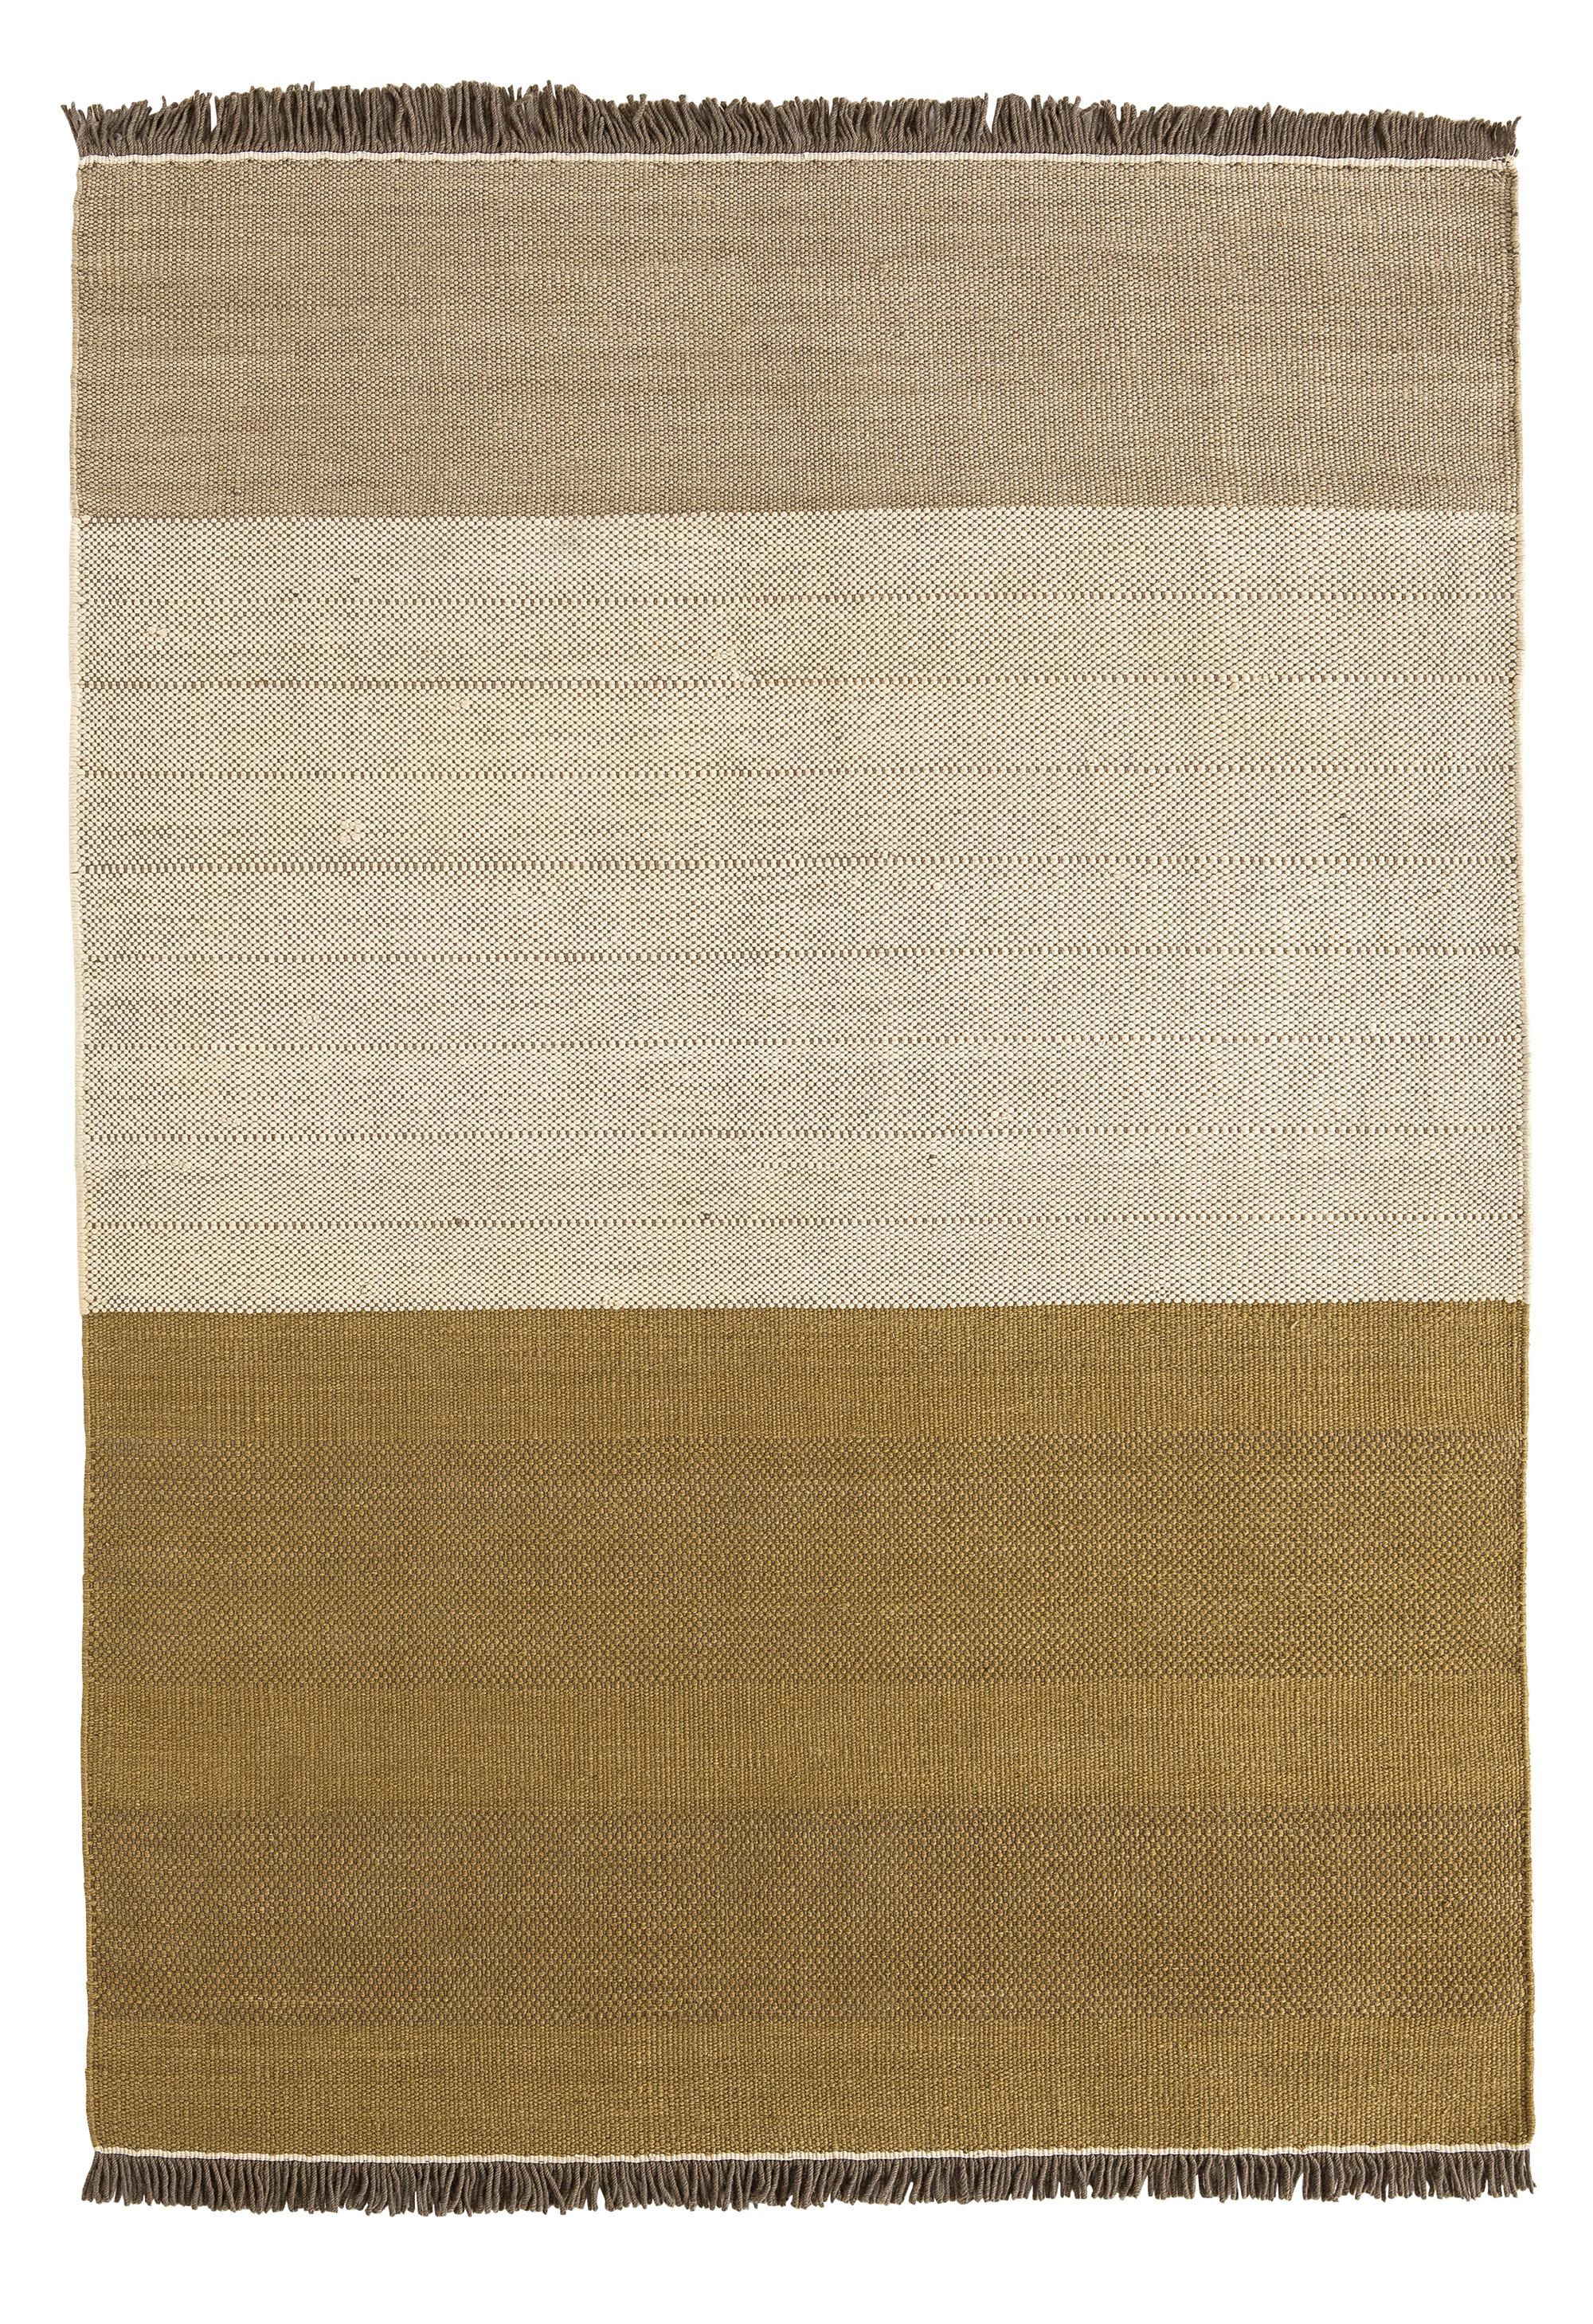 Small 'Tres Stripes' Hand-Loomed Rug for Nanimarquina In New Condition For Sale In Glendale, CA